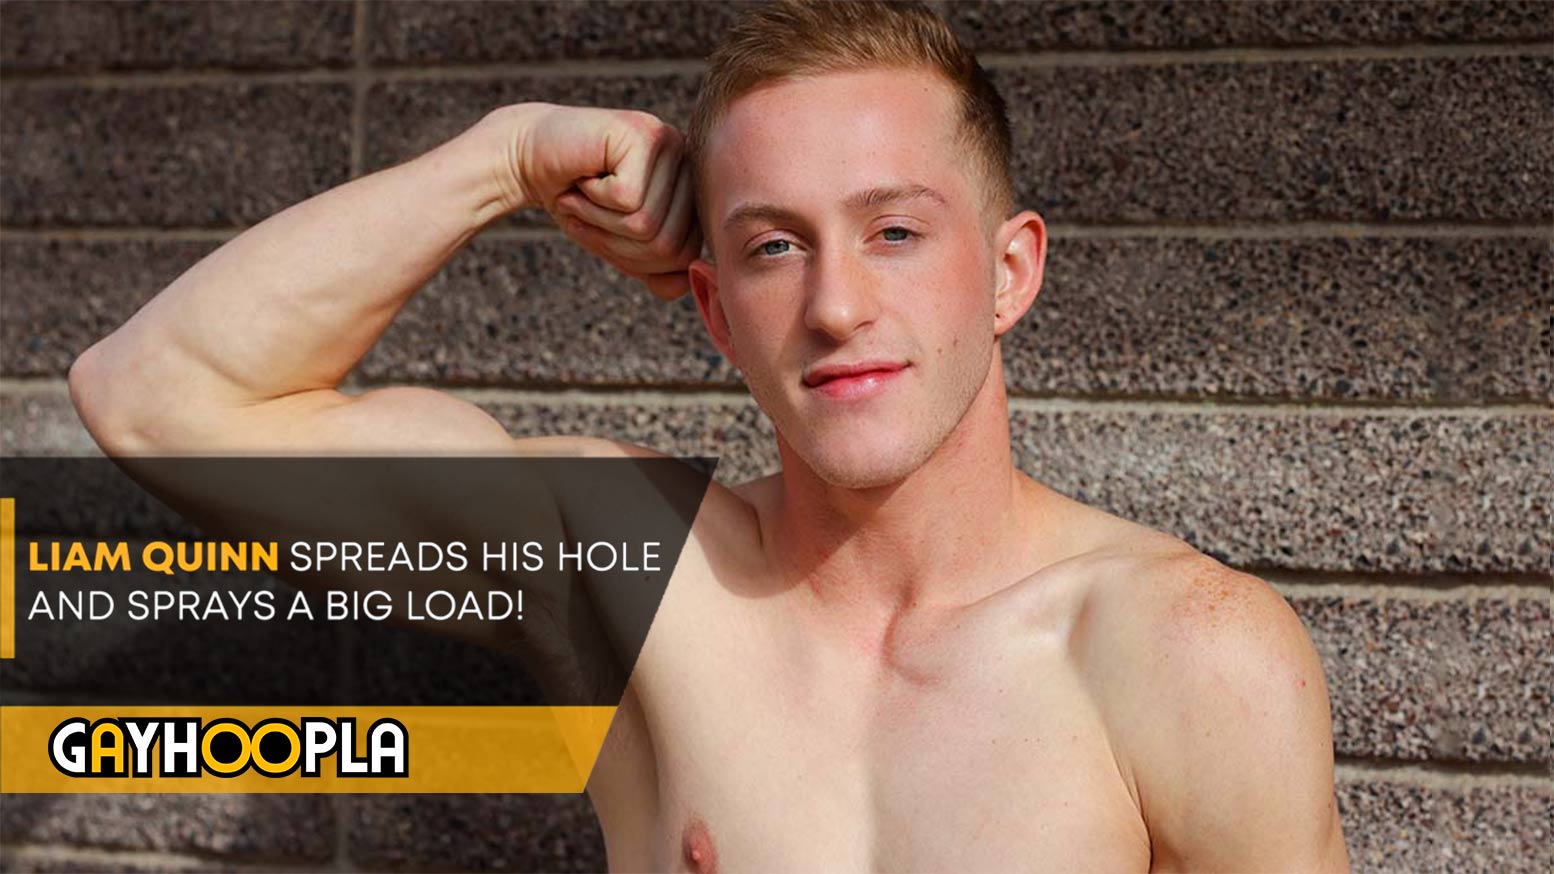 Liam Quinn Spreads His Hole And Sprays A BIG Load!